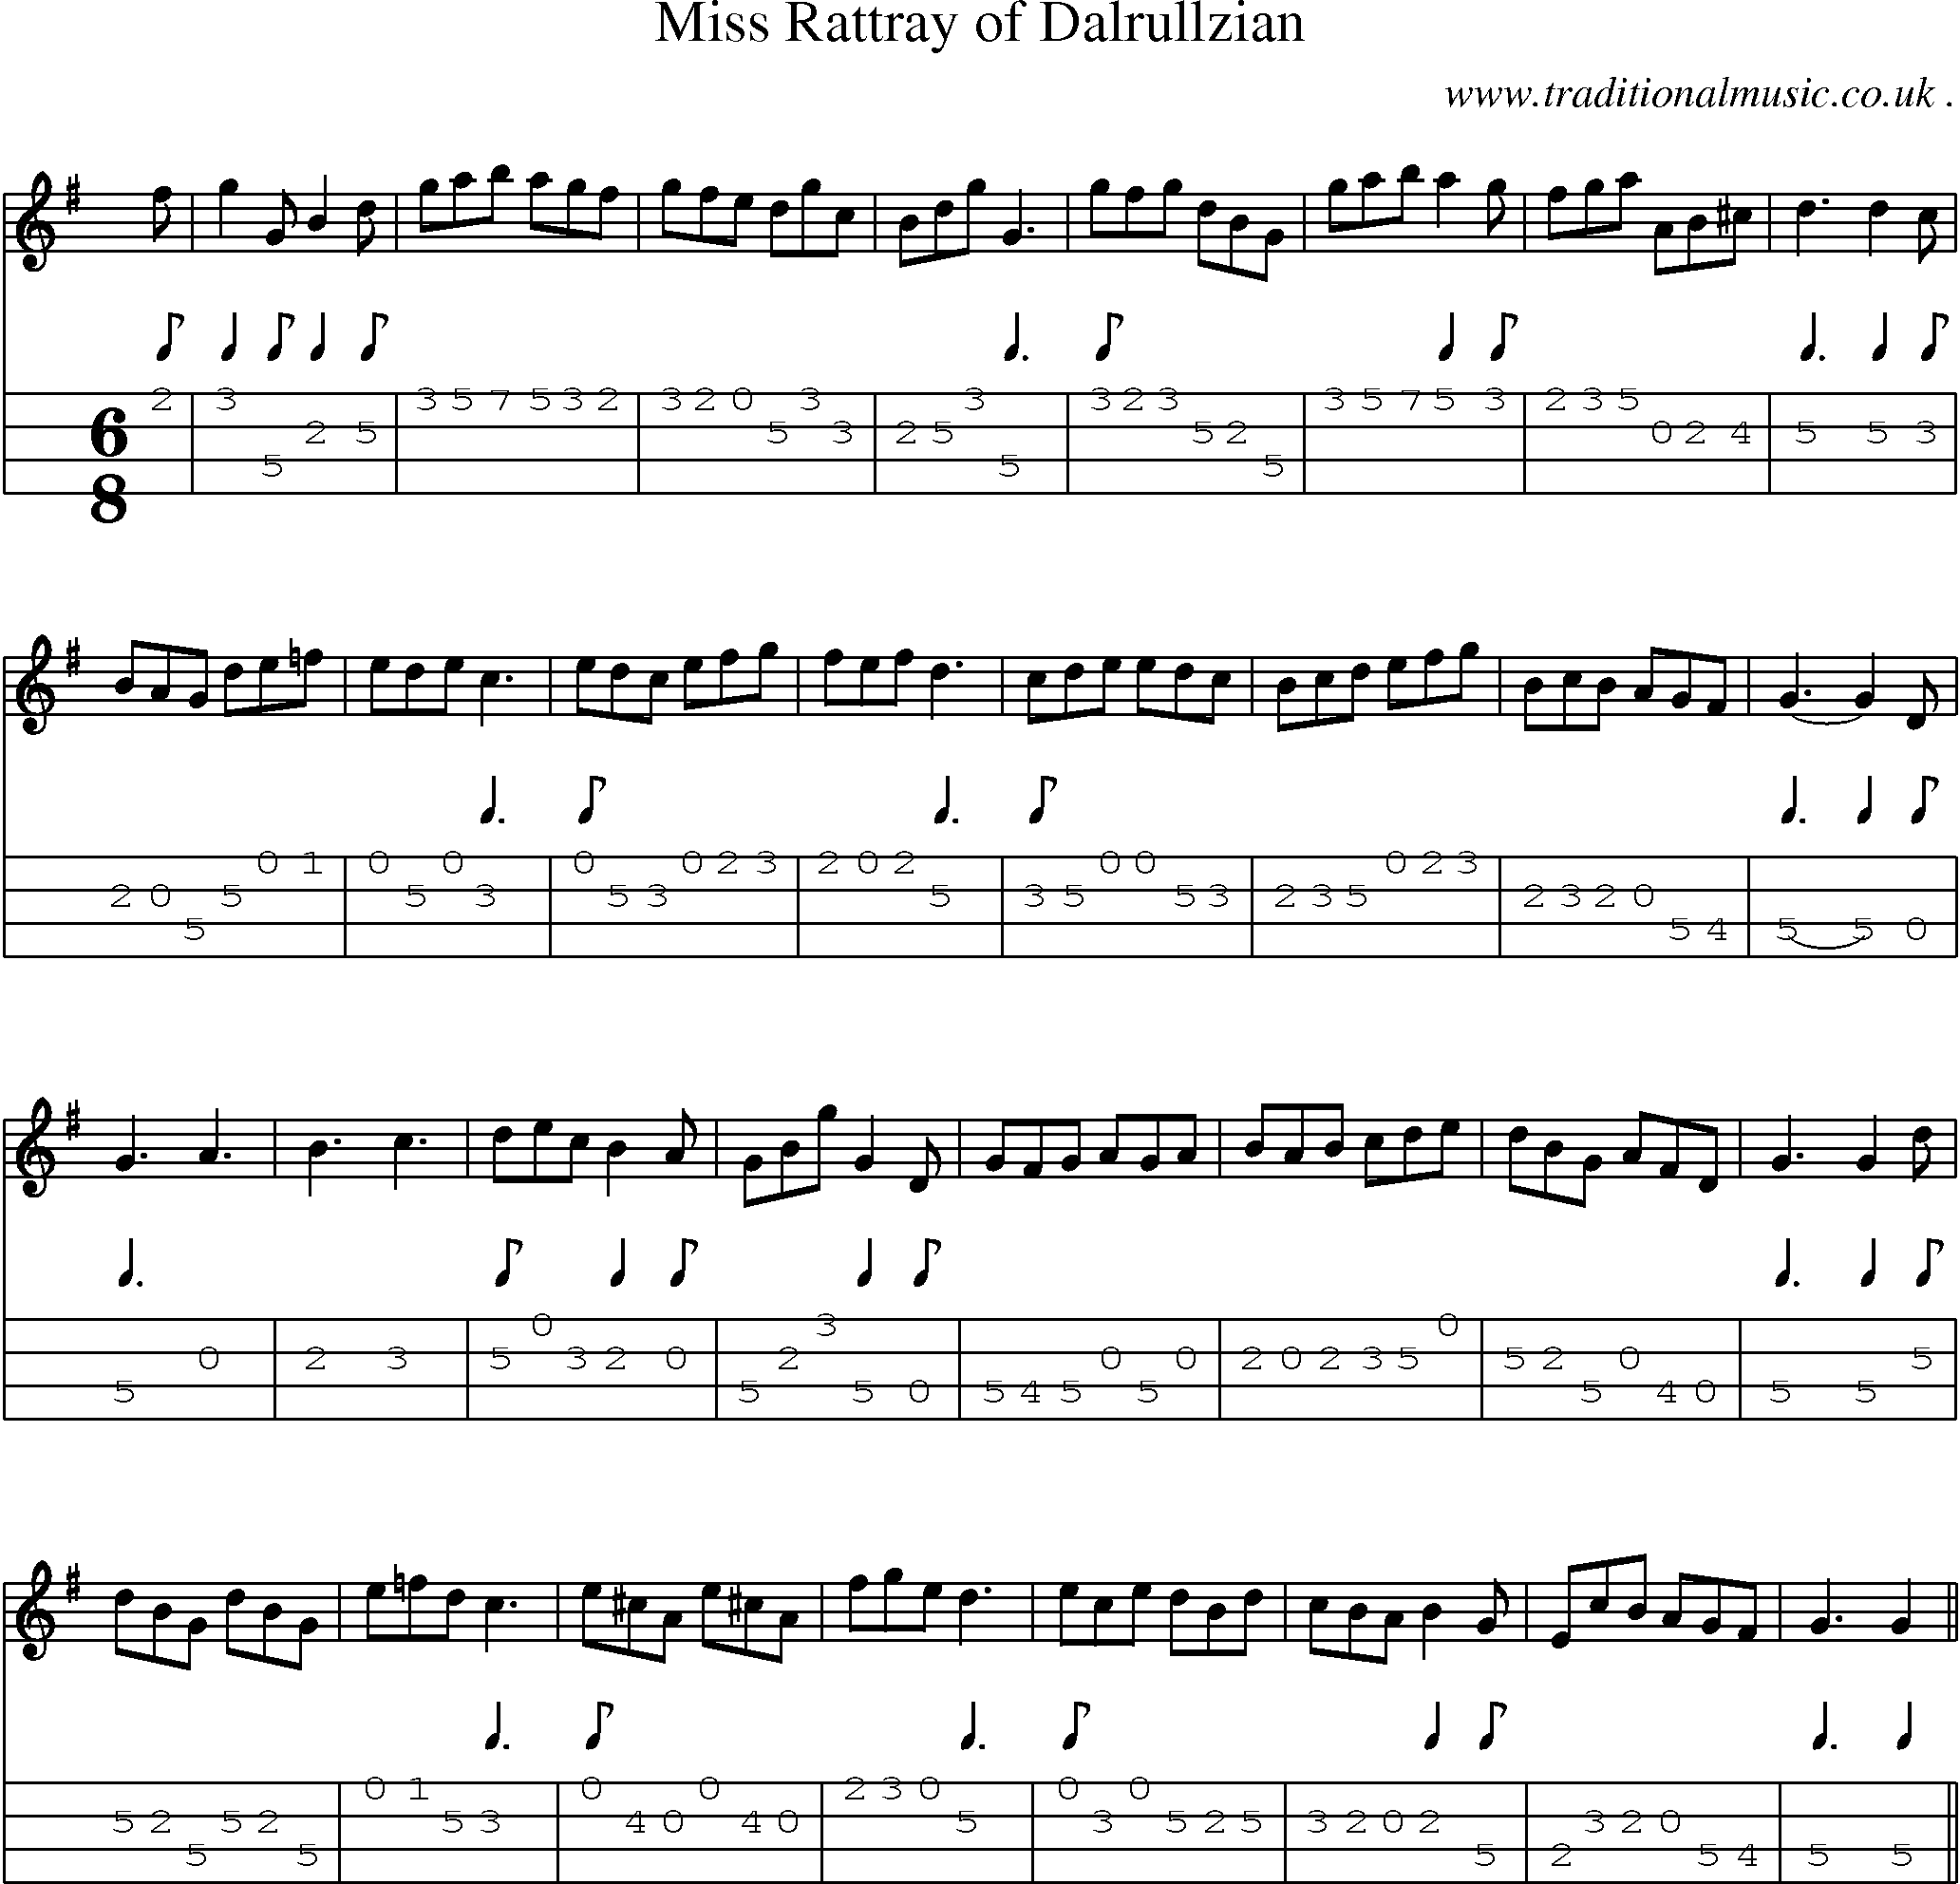 Sheet-music  score, Chords and Mandolin Tabs for Miss Rattray Of Dalrullzian